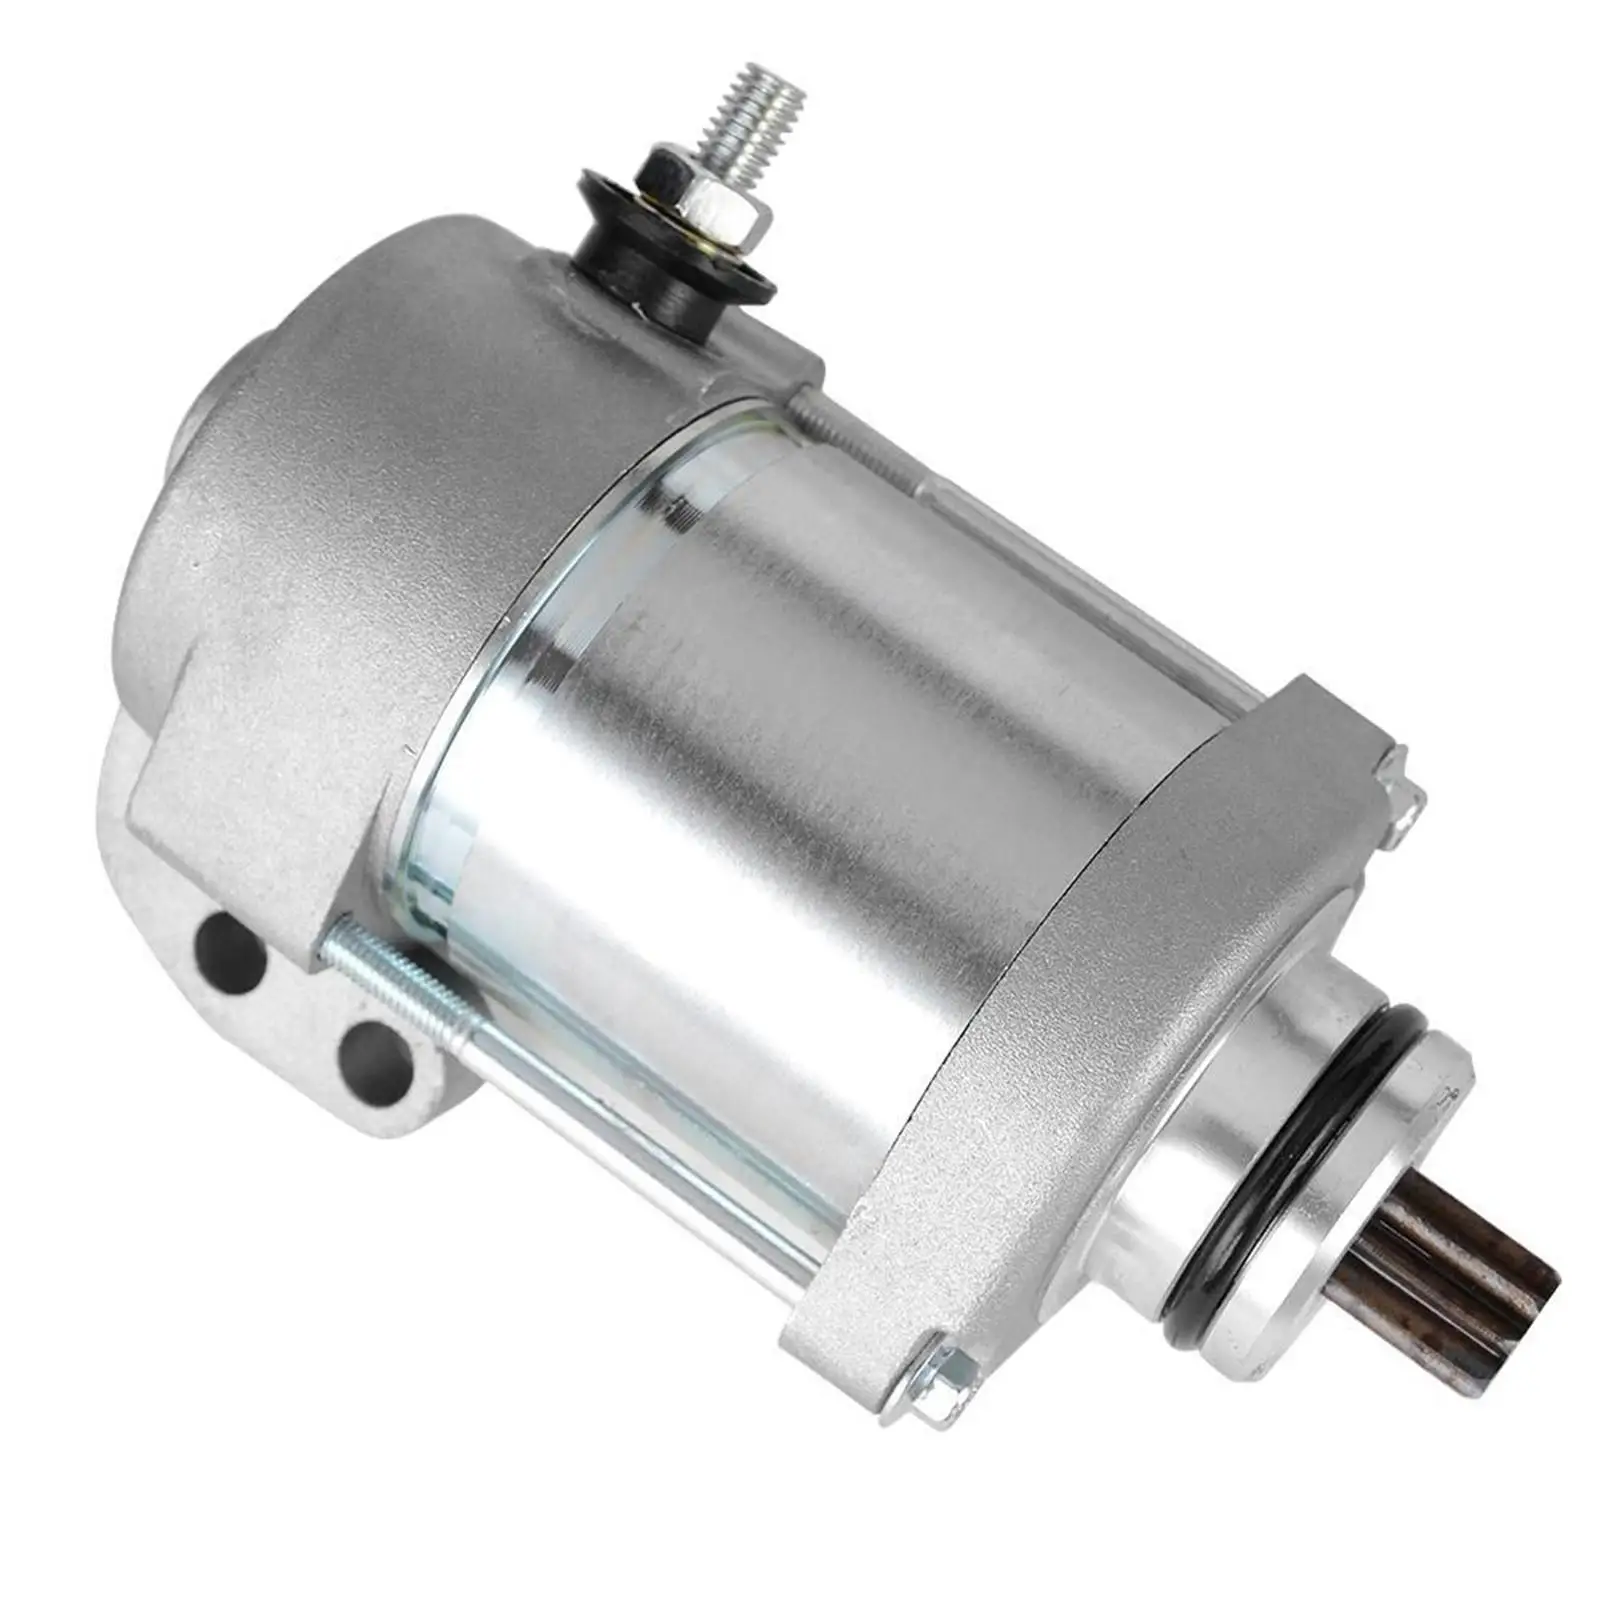 Starter Motor High Quality Accessories 464244 for Ktm 200 250 300 Exc